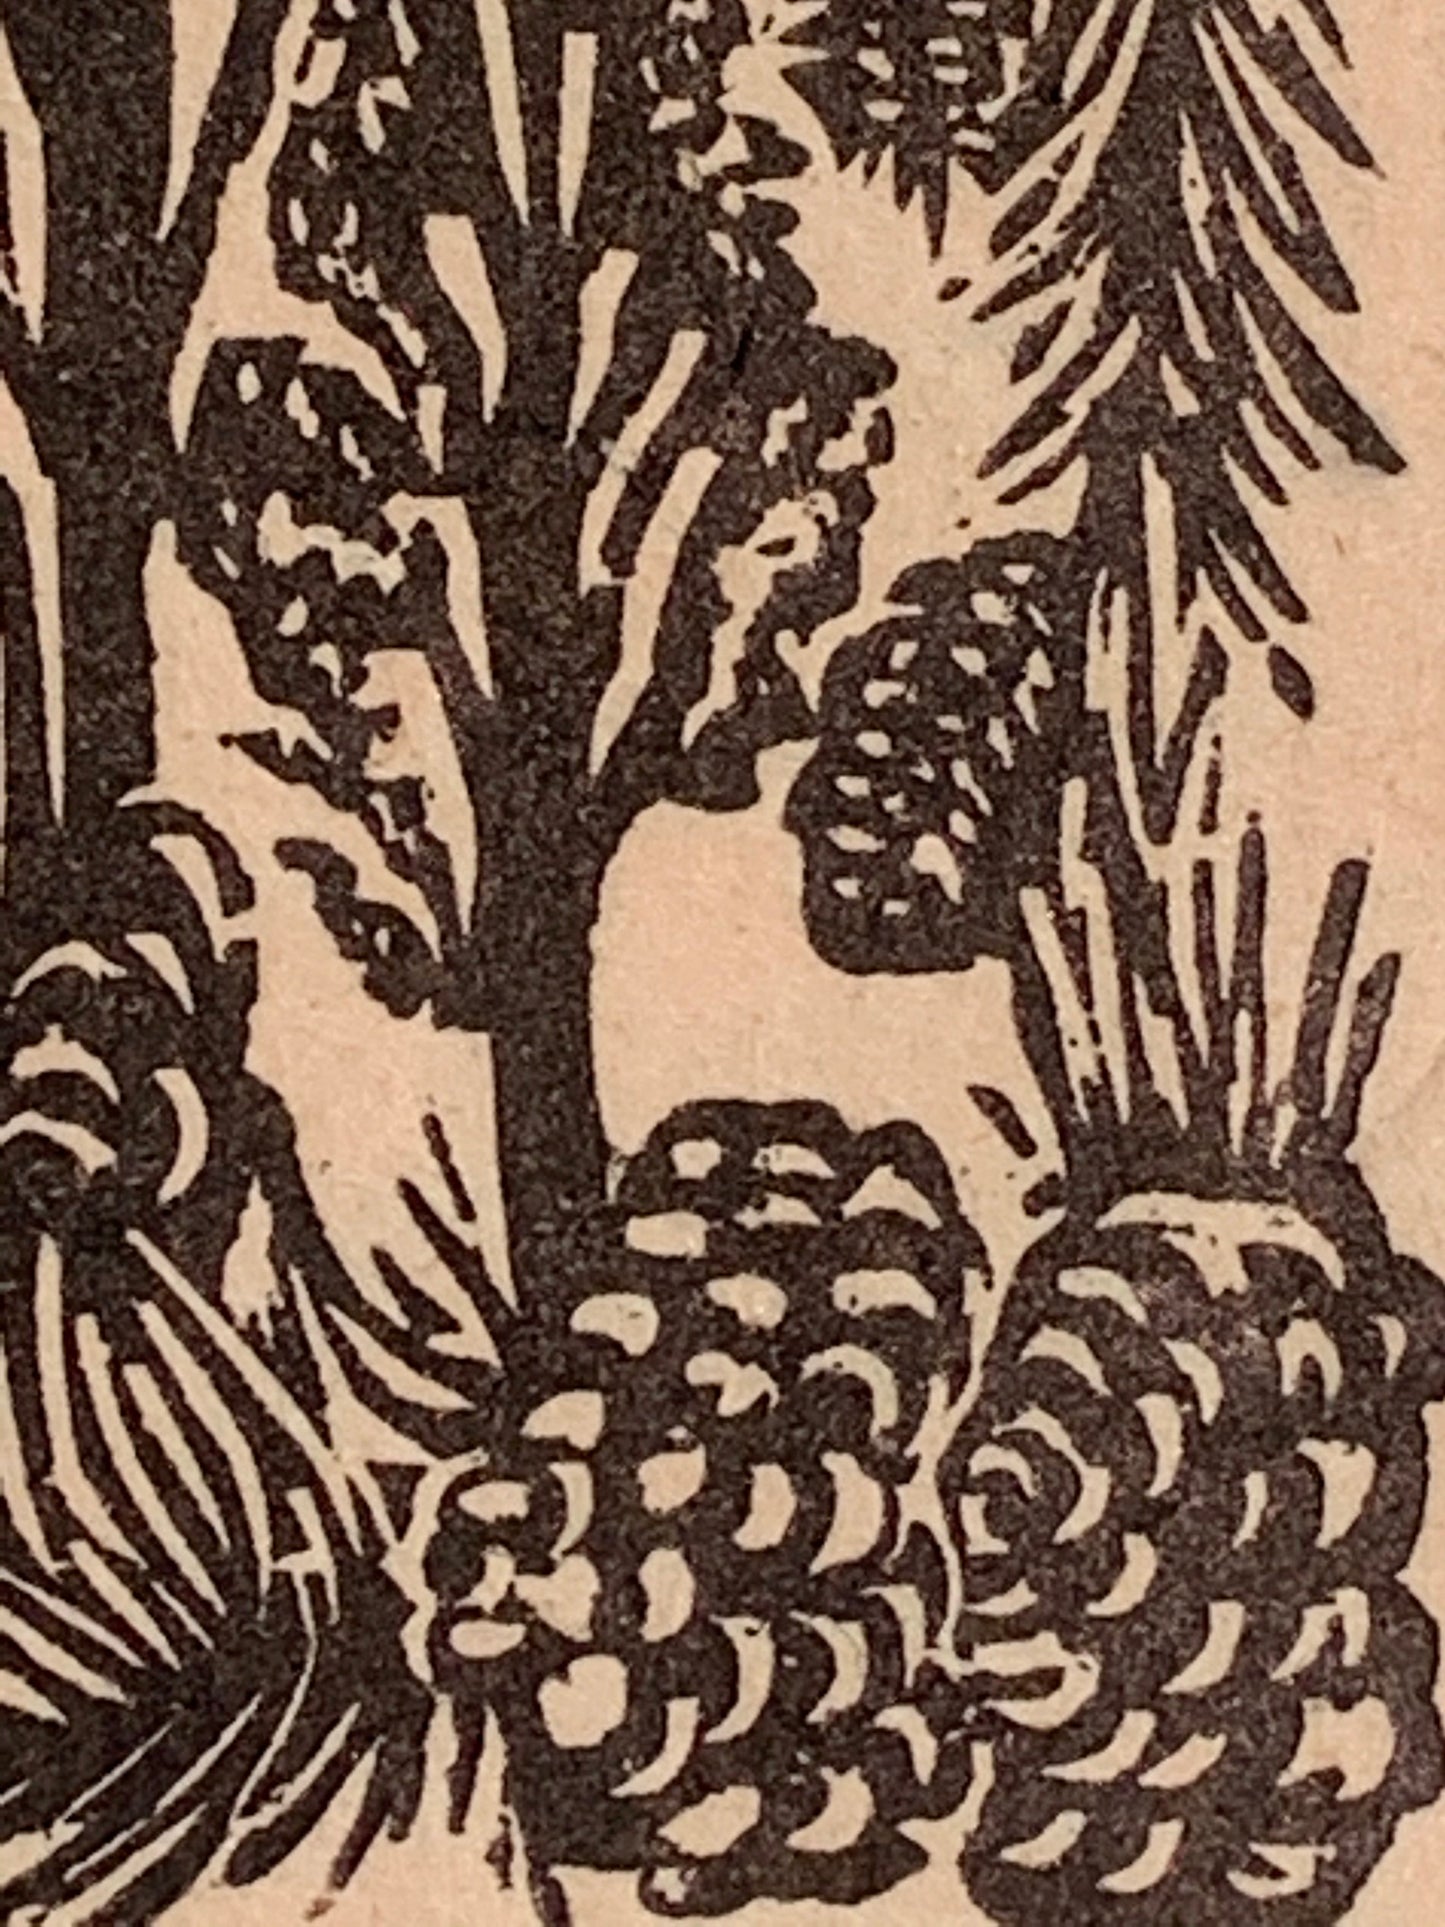 Pinyon Pine Nut Tree Small Original Woodcut from Alpine Mountain Trees Landscape Collection